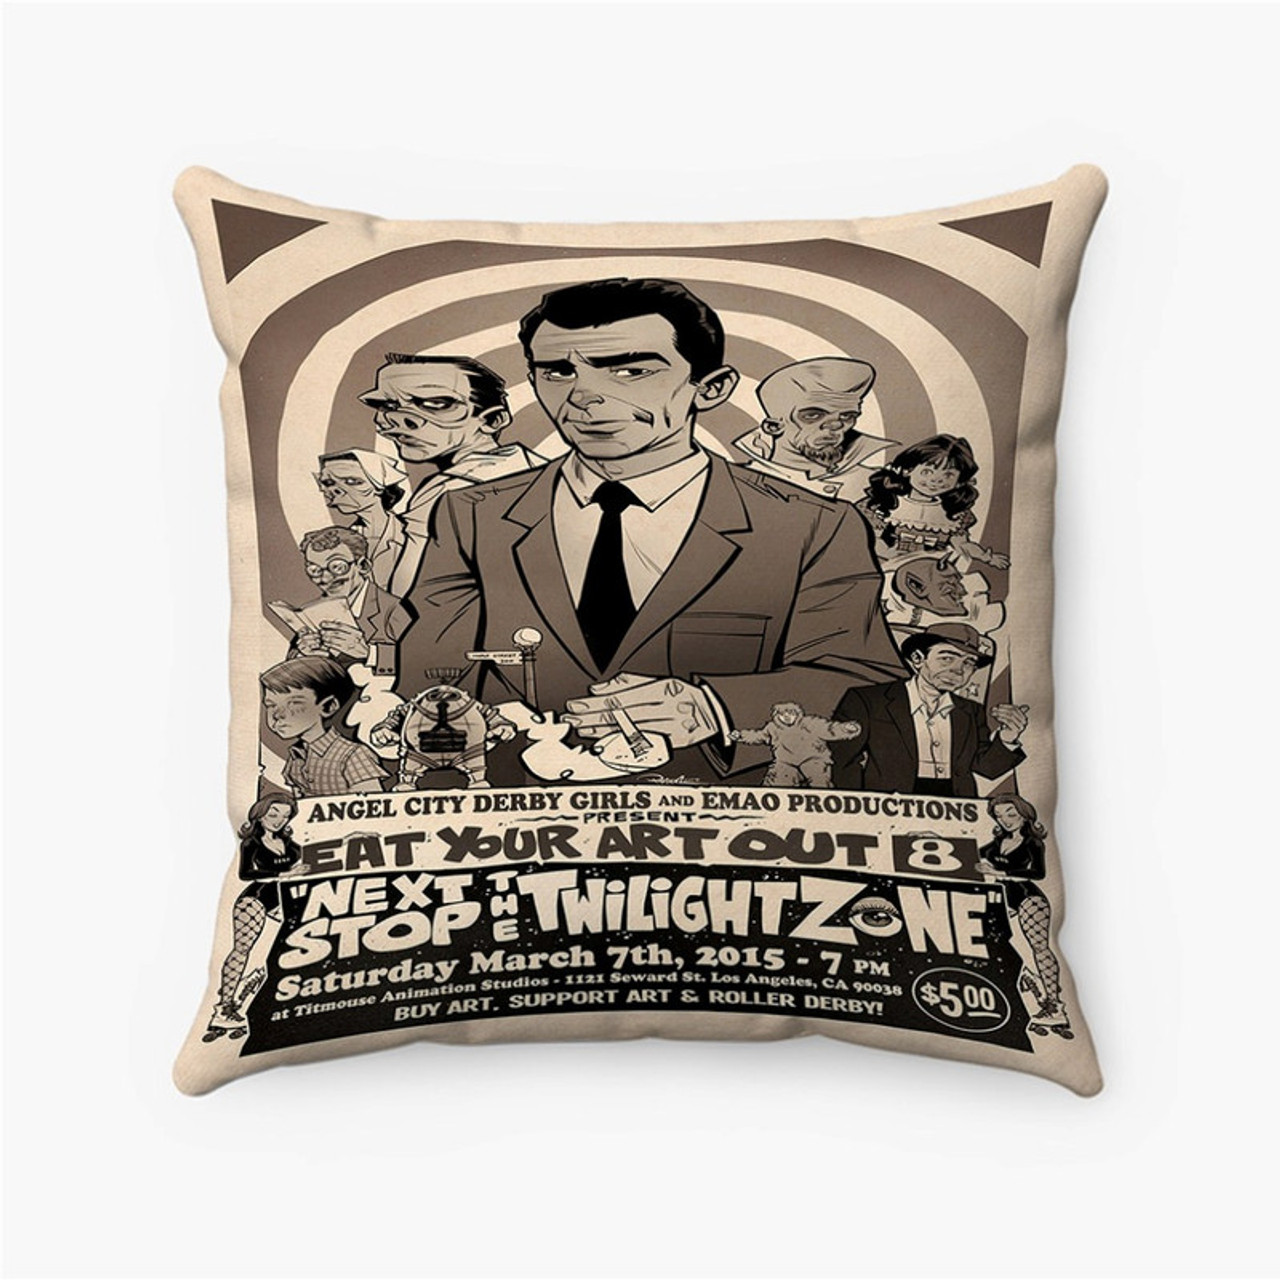 https://cdn11.bigcommerce.com/s-xhmrmcecz5/images/stencil/1280x1280/products/198300/203660/The-Twilight-Zone-Custom-Pillow-Case__82614.1673596532.jpg?c=1